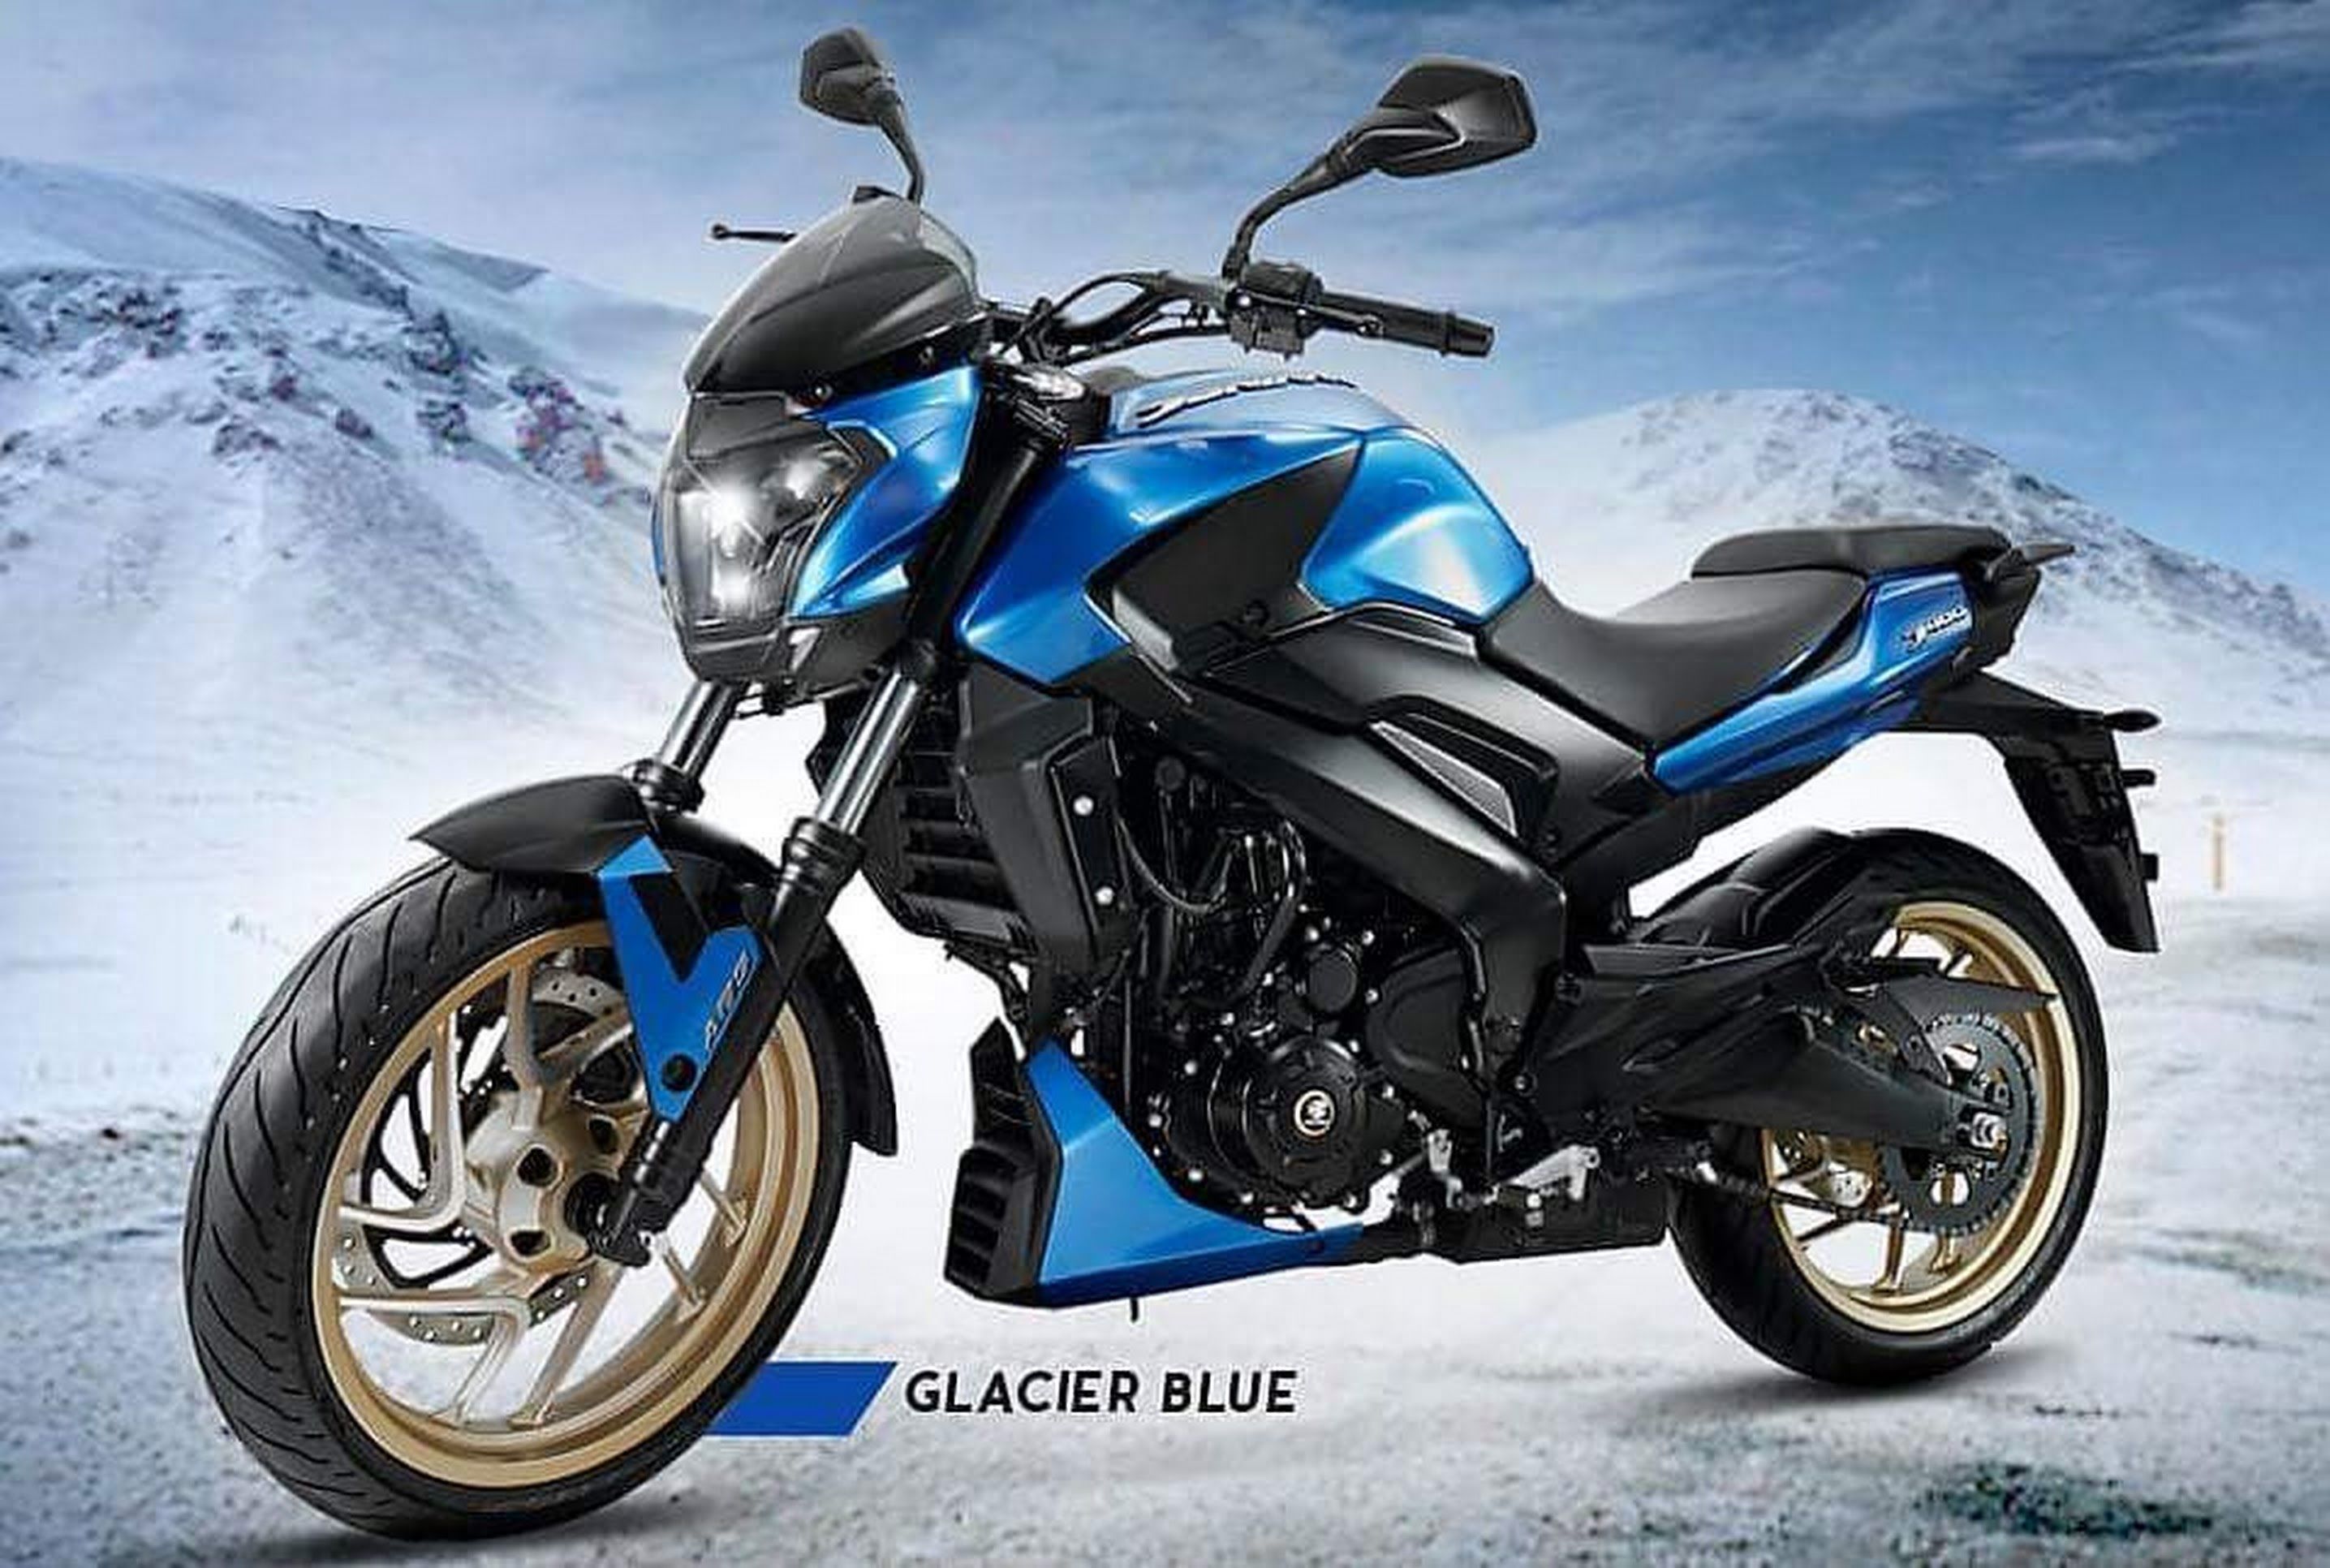 #Bajaj_Dominar_400 With #Golden #Alloy_Wheels #Launched